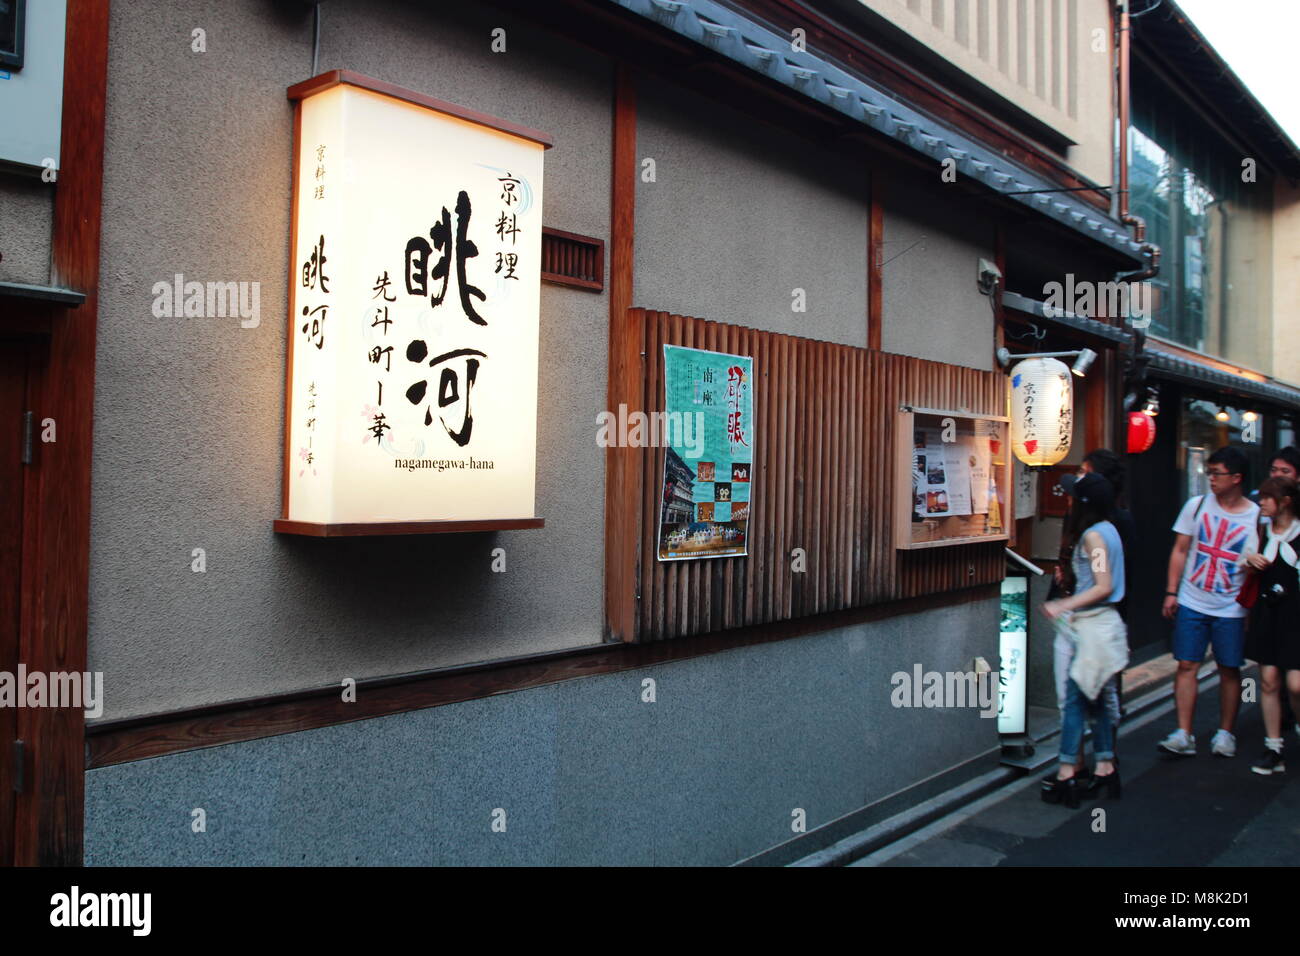 Japanese izakaya restaurant located at the narrow street in the Pontocho Alley of downtown Kyoto, Japan at dusk. Customers looking at the menu. Stock Photo